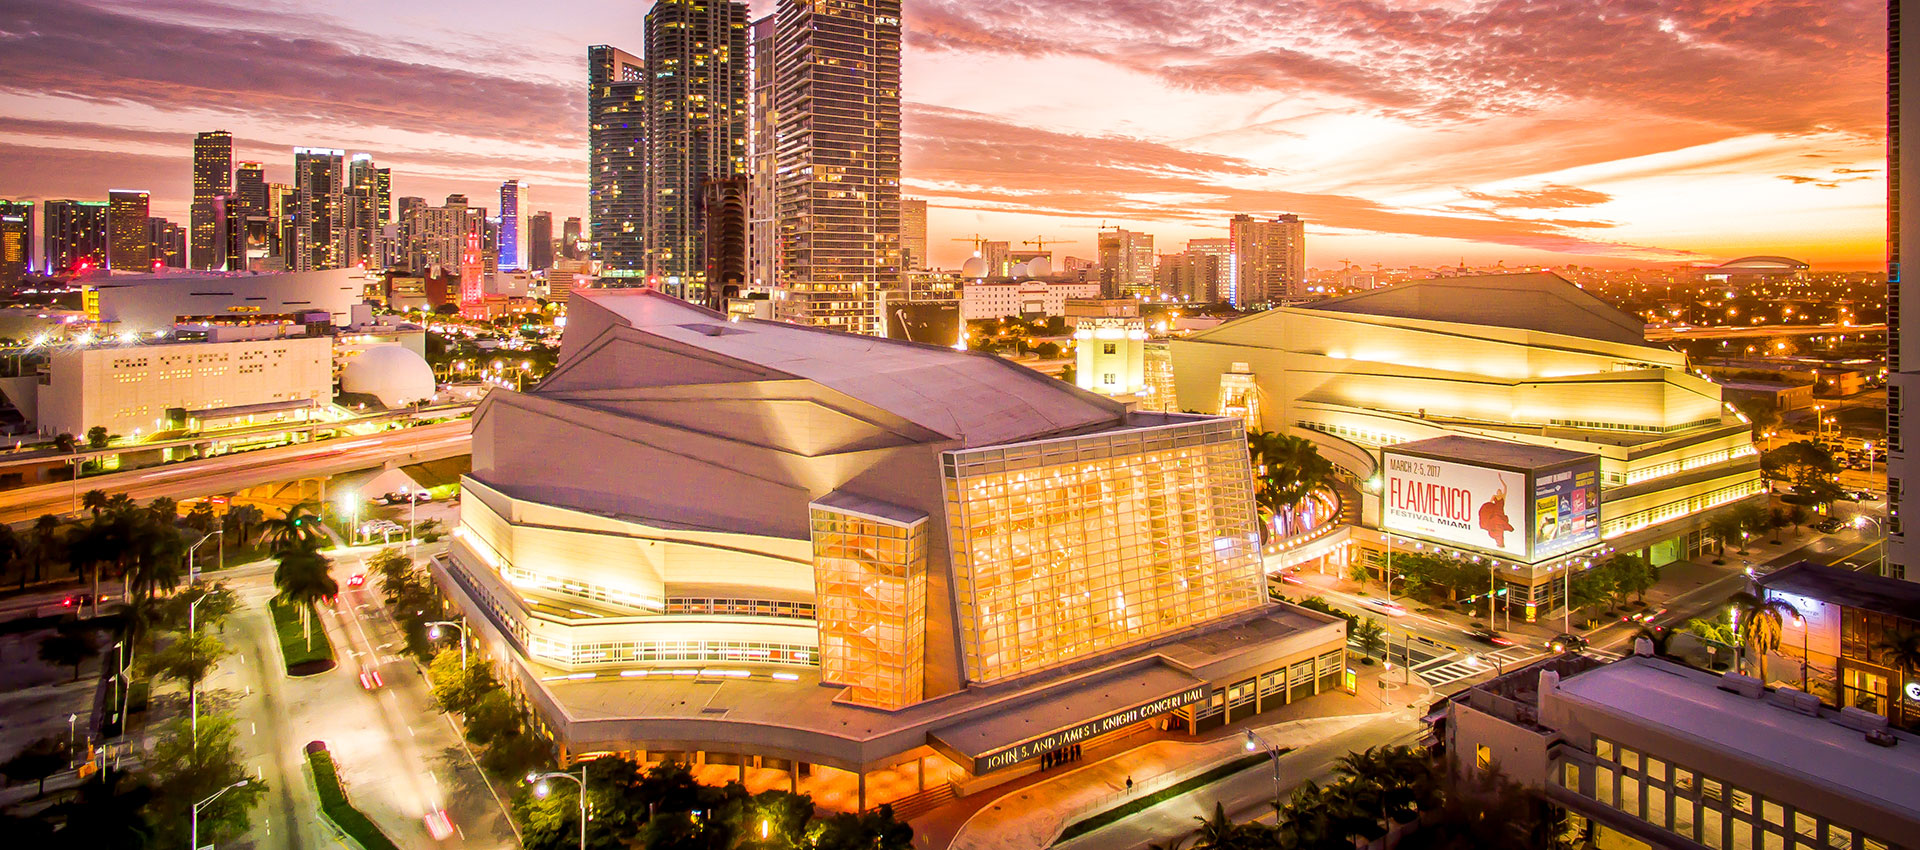 Adrienne Arsht Center for the Performing arts Buildings aerial view